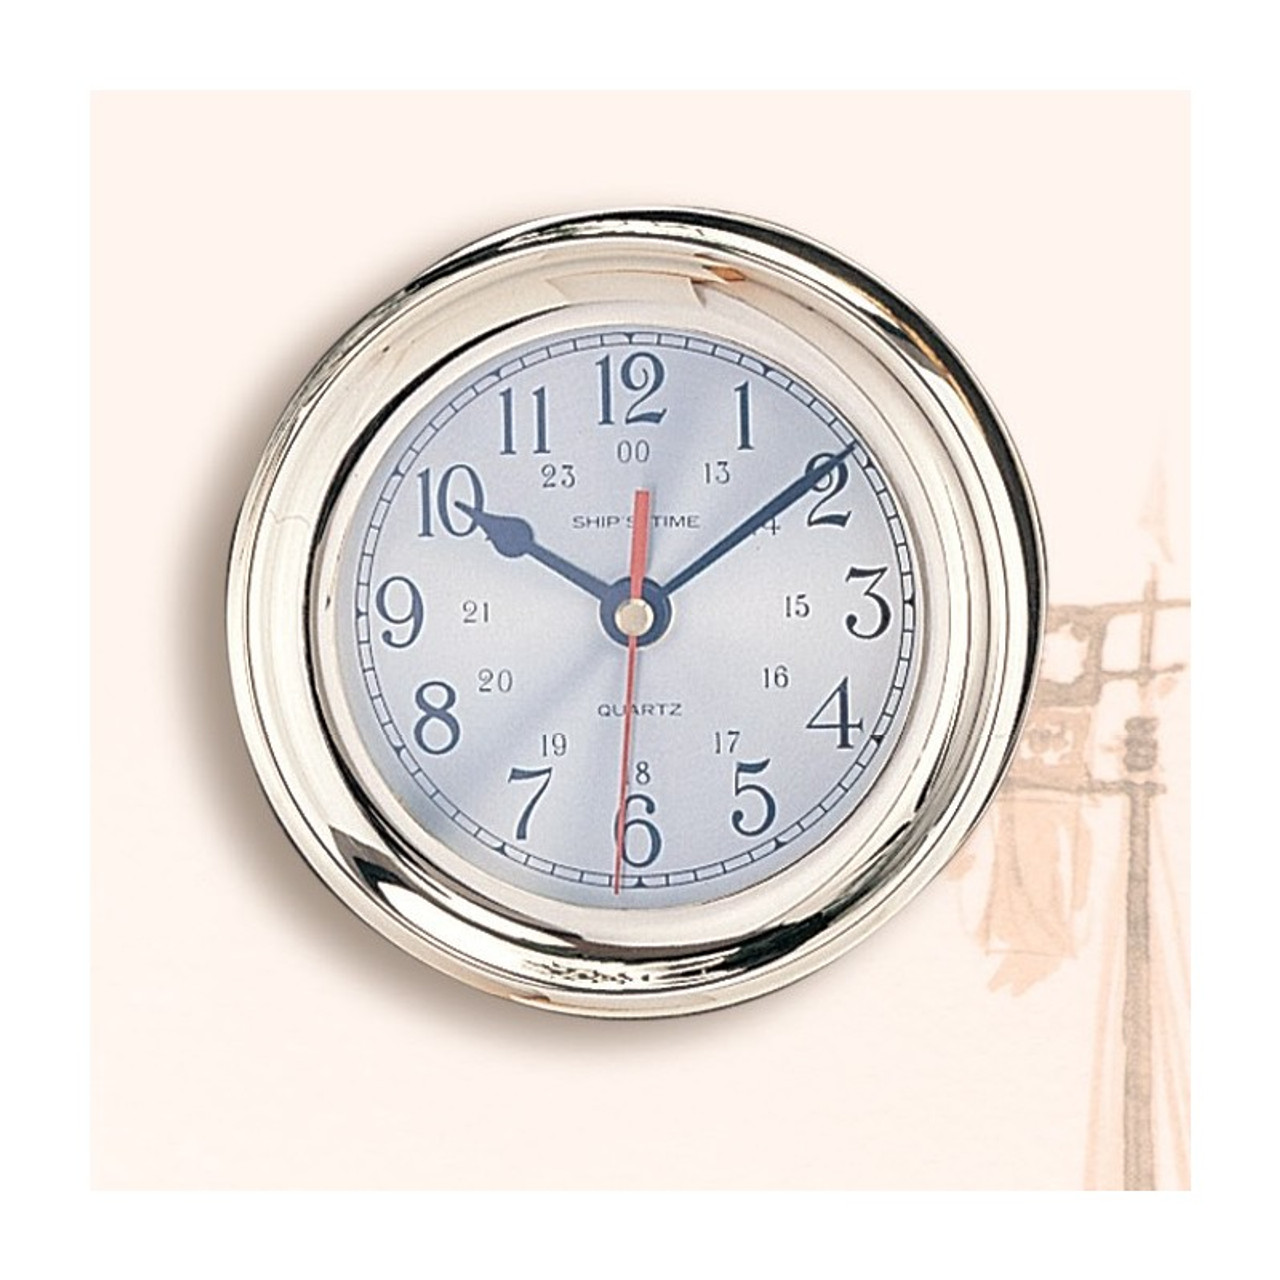 https://cdn11.bigcommerce.com/s-y6fjj/images/stencil/1280x1280/products/265/3629/4.5-Inch-captain-clock__38250.1614107584.jpg?c=2